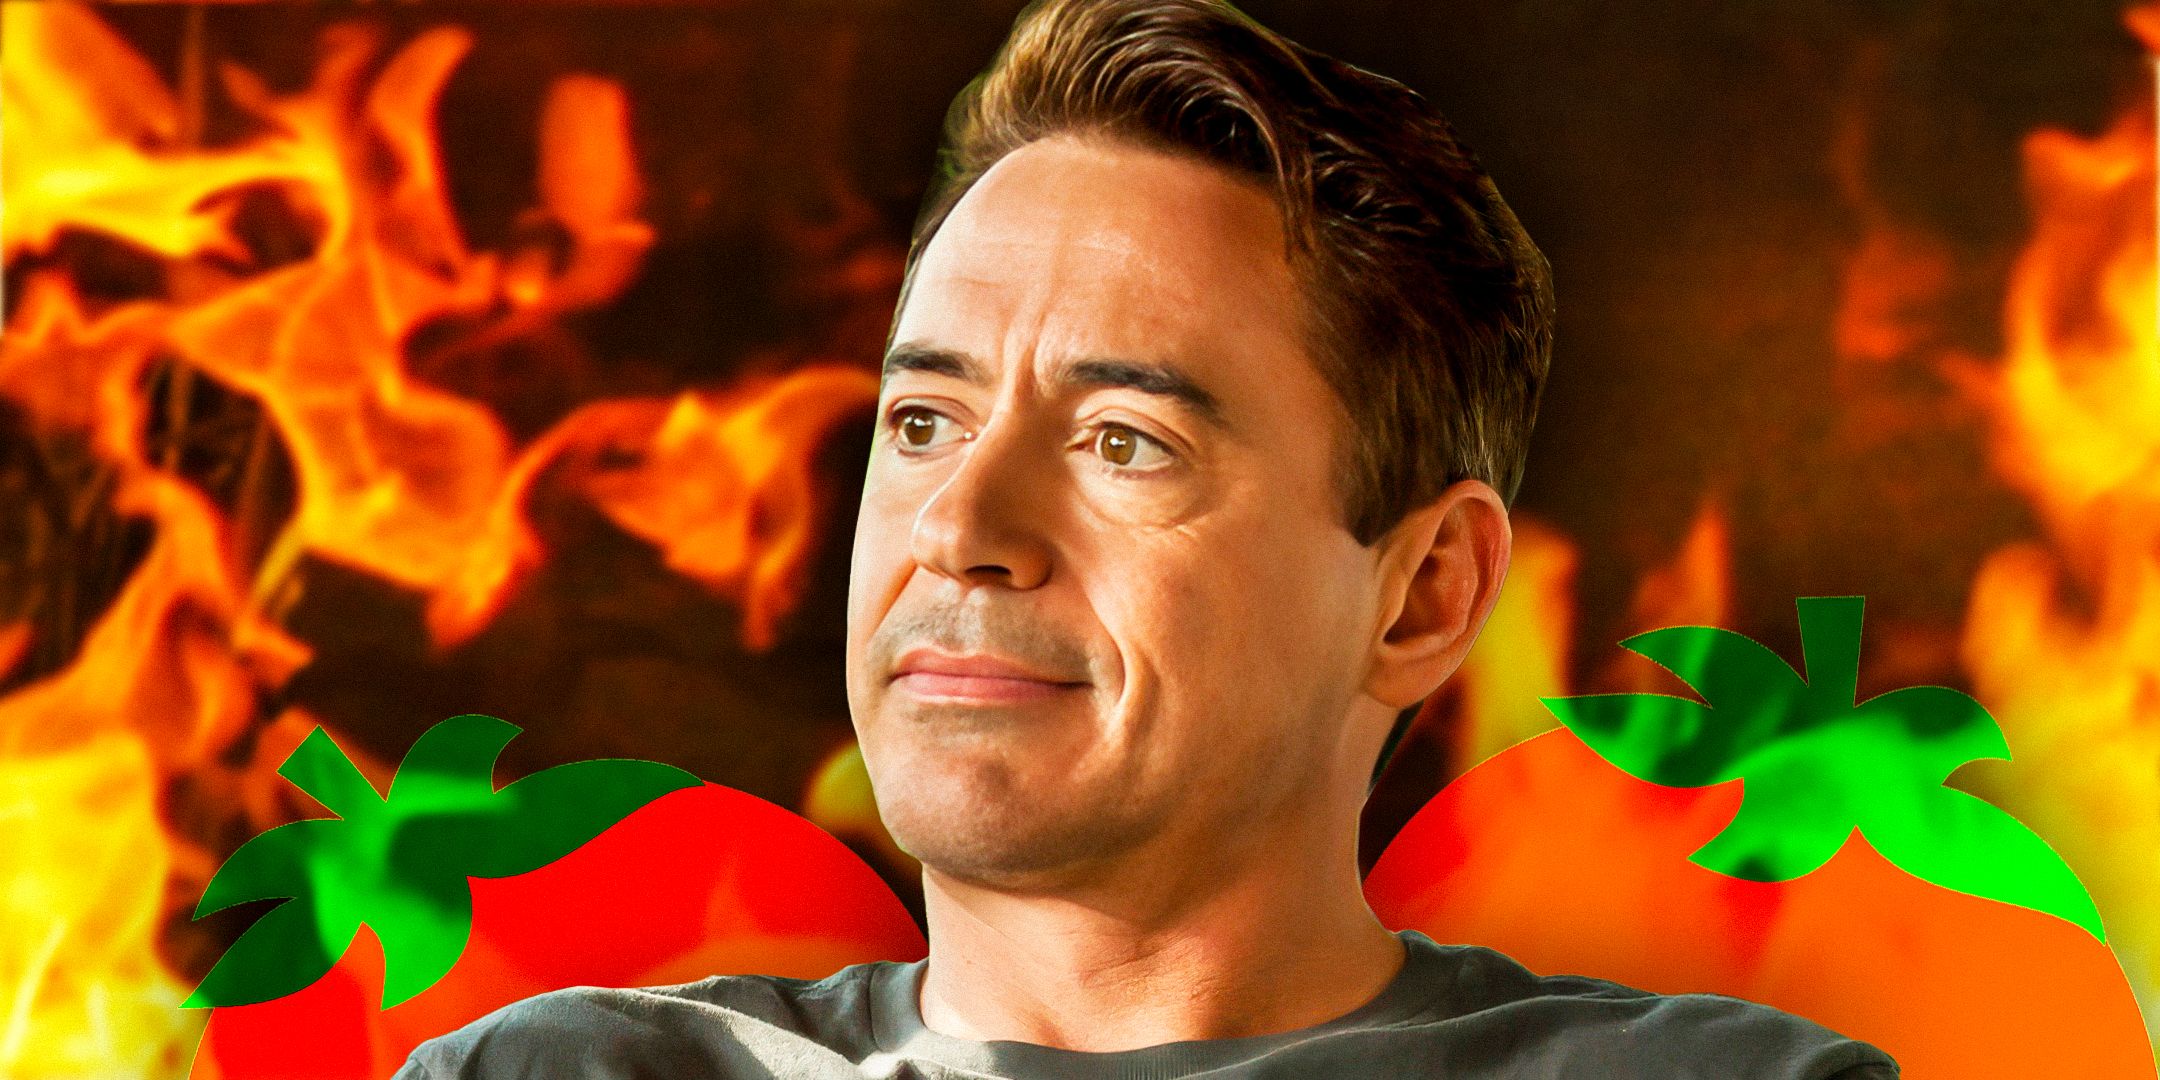 Robert Downey Jr's New Show Is Even Better Thanks To Perfect Callback To His 82% RT Comedy Role From 16 Years Ago